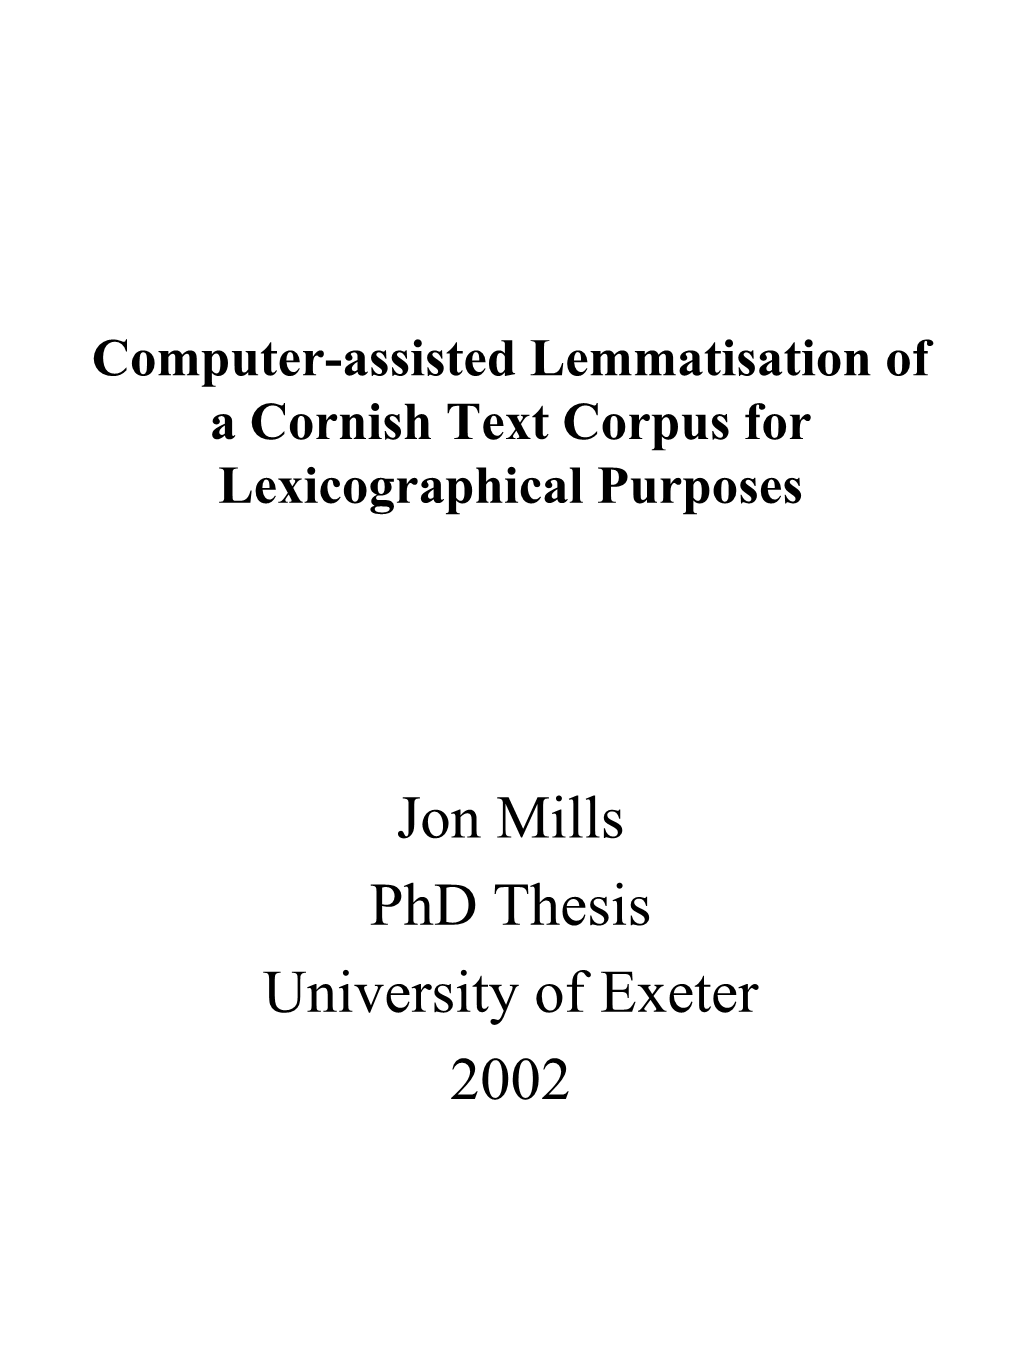 Computer-Assisted Lemmatisation of a Cornish Text Corpus for Lexicographical Purposes